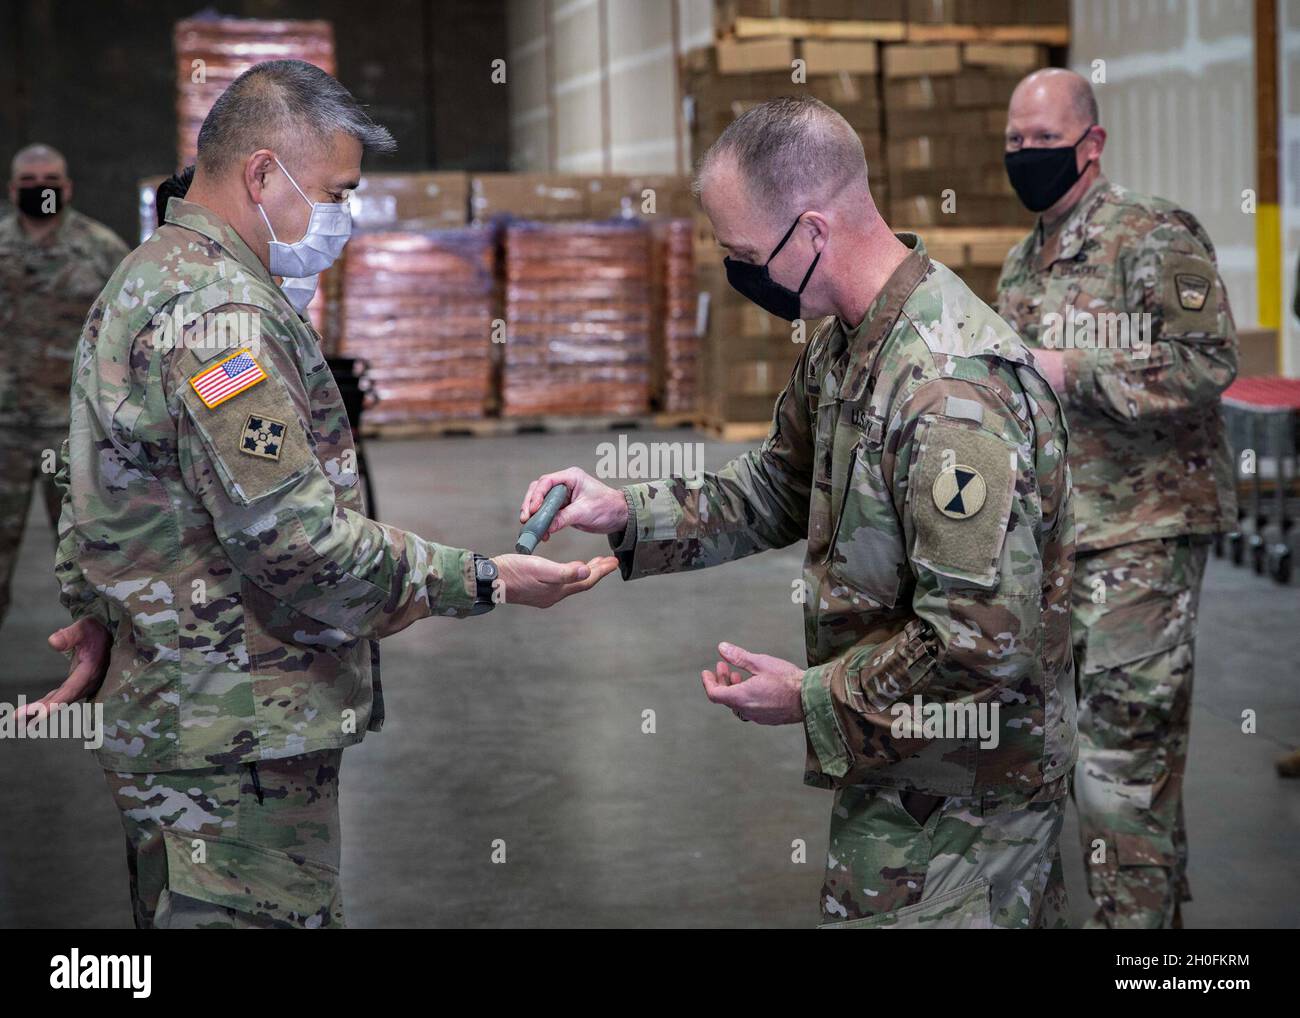 Command Sgt. Maj. Kelly Wickel provides hand sanitizer to Staff Sgt. Alan Dequilla after presenting Dequilla’s award for outstanding service during food bank operations in Kent, Washington, Feb. 26, 2021. Northwest Harvest ended their request for National Guard support so JTF Steelhead can shift efforts towards COVID-19 vaccine administration. The Washington National Guard has supported Northwest Harvest in food packaging since April, 2020 and has aided in the distribution of over 7.8 million pounds of food at various Northwest Harvest sites across Washington. Stock Photo